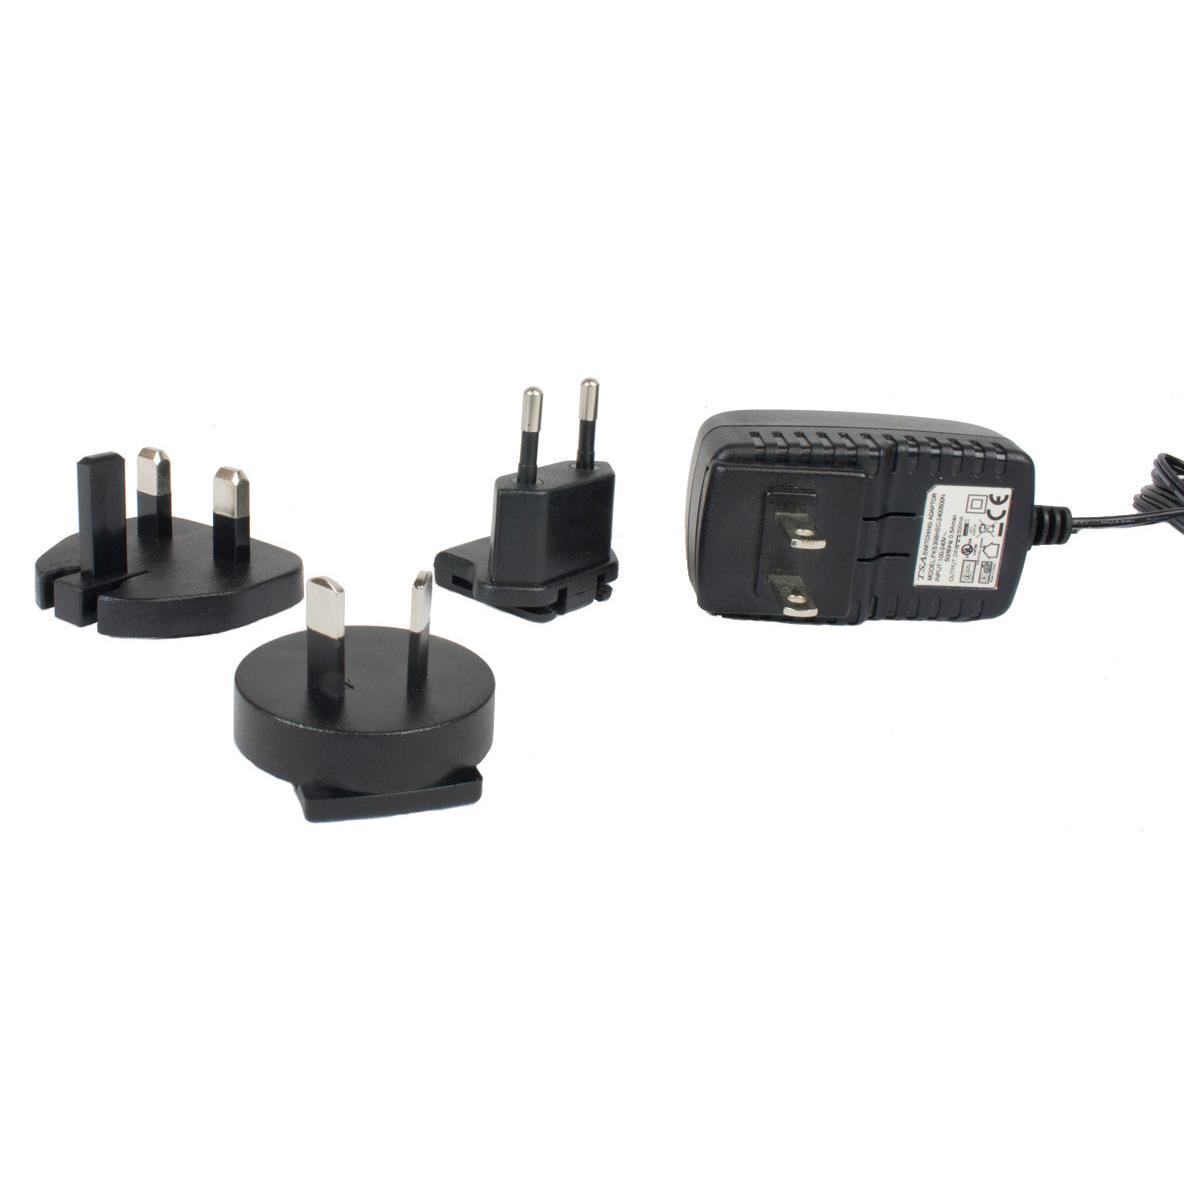 Image of Lowell Manufacturing PS2405 Universal Power Supply with Adapters